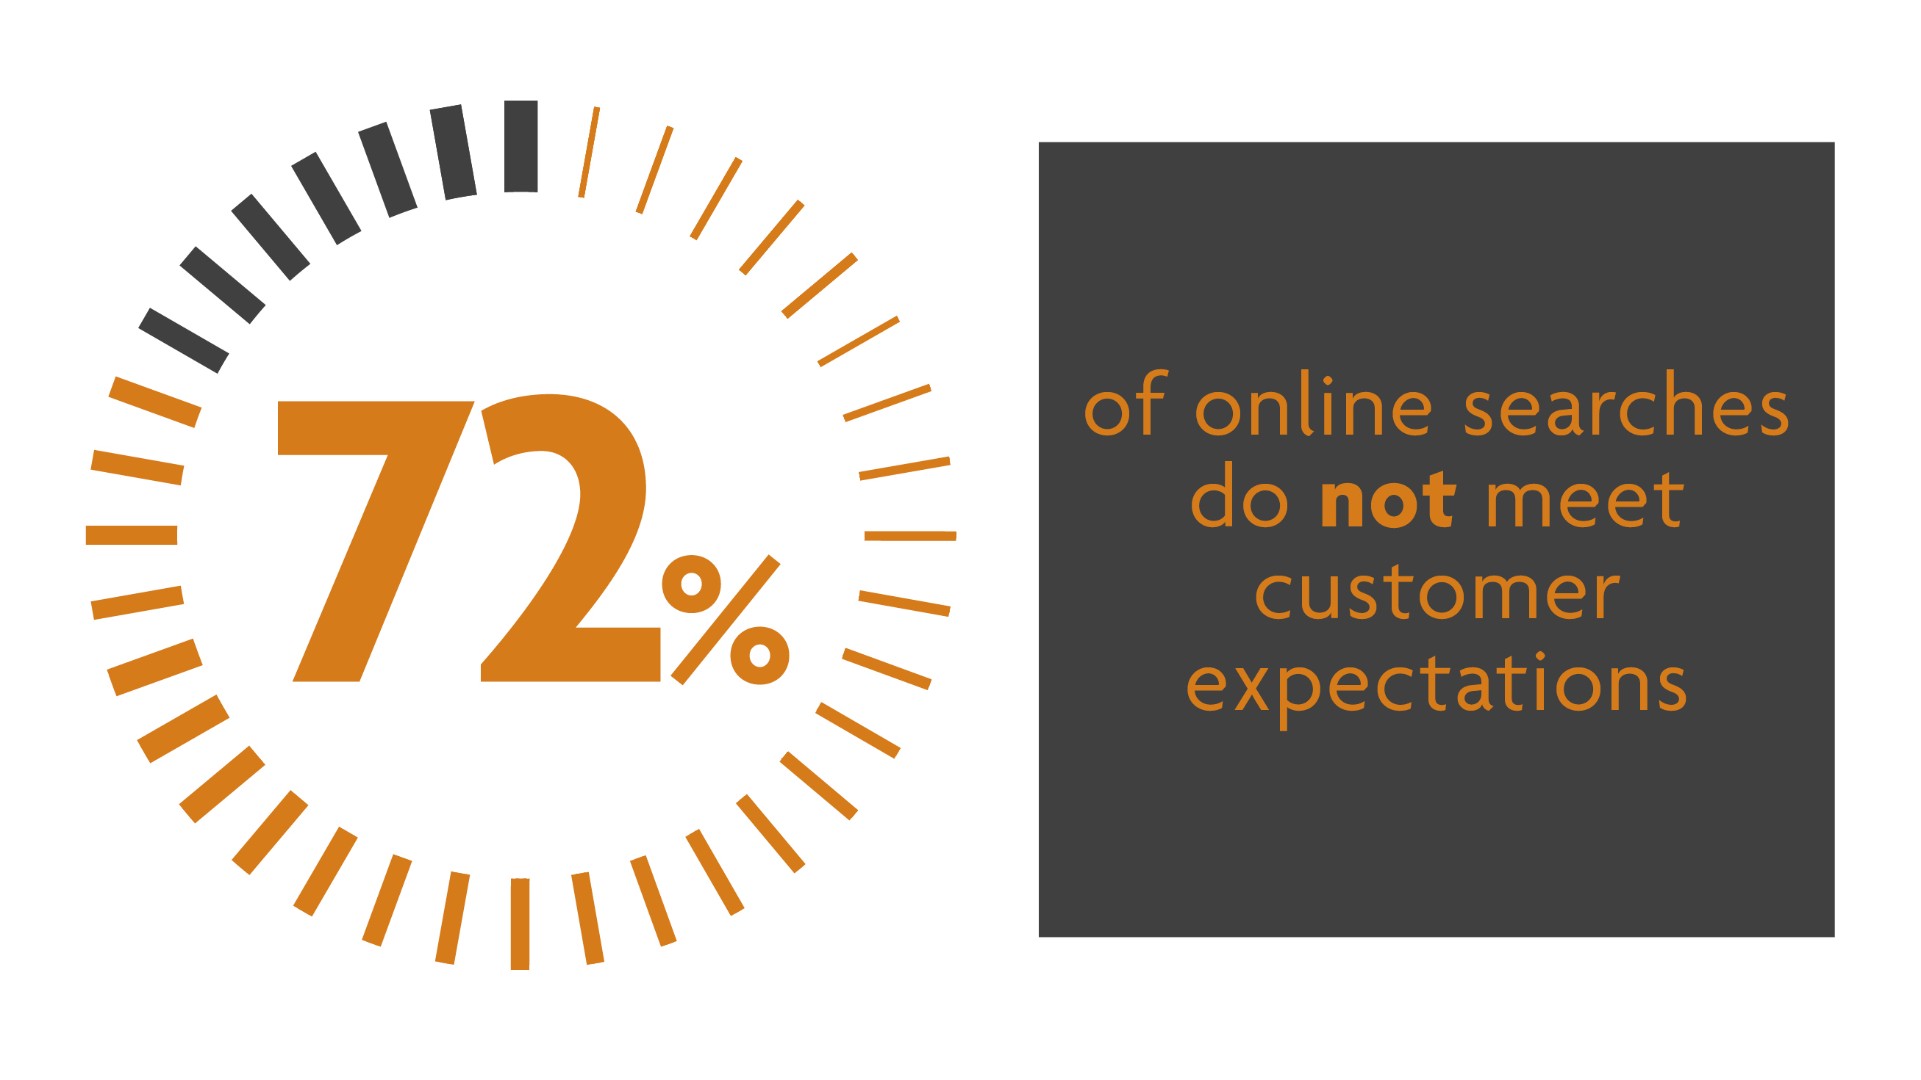 72% of online searches do not meet customer expectations